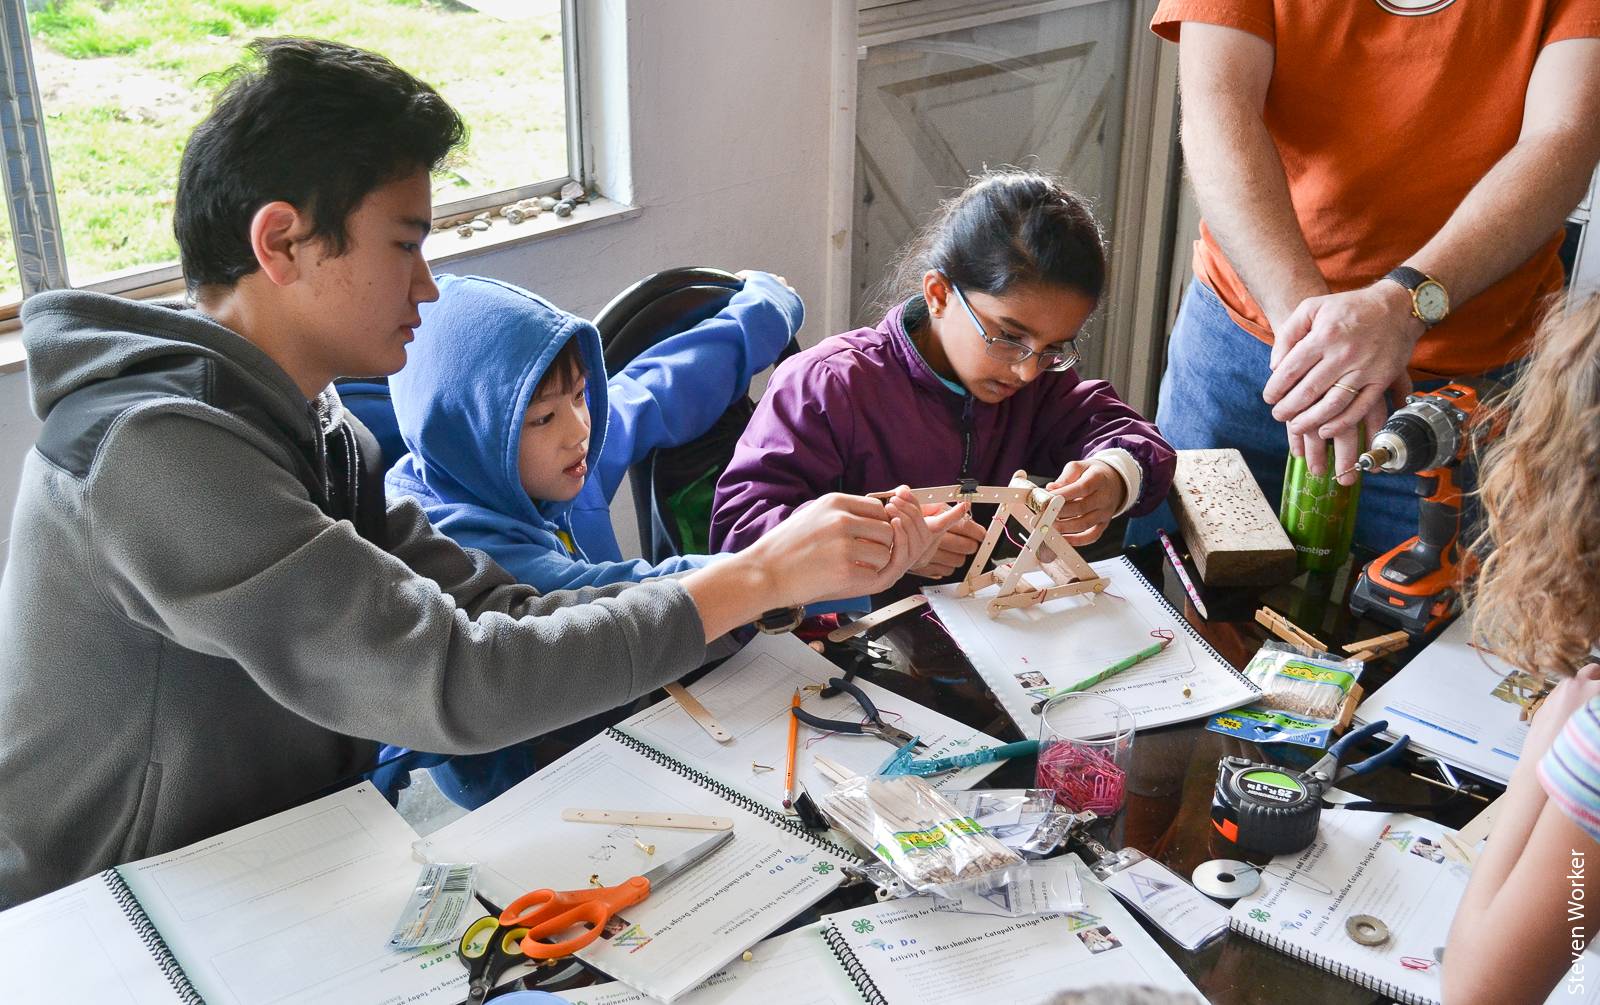 To help improve scientific literacy among youth, the 4-H Youth Development Program offers a design-based science curriculum, Junk Drawer Robotics, that features engineering activities.